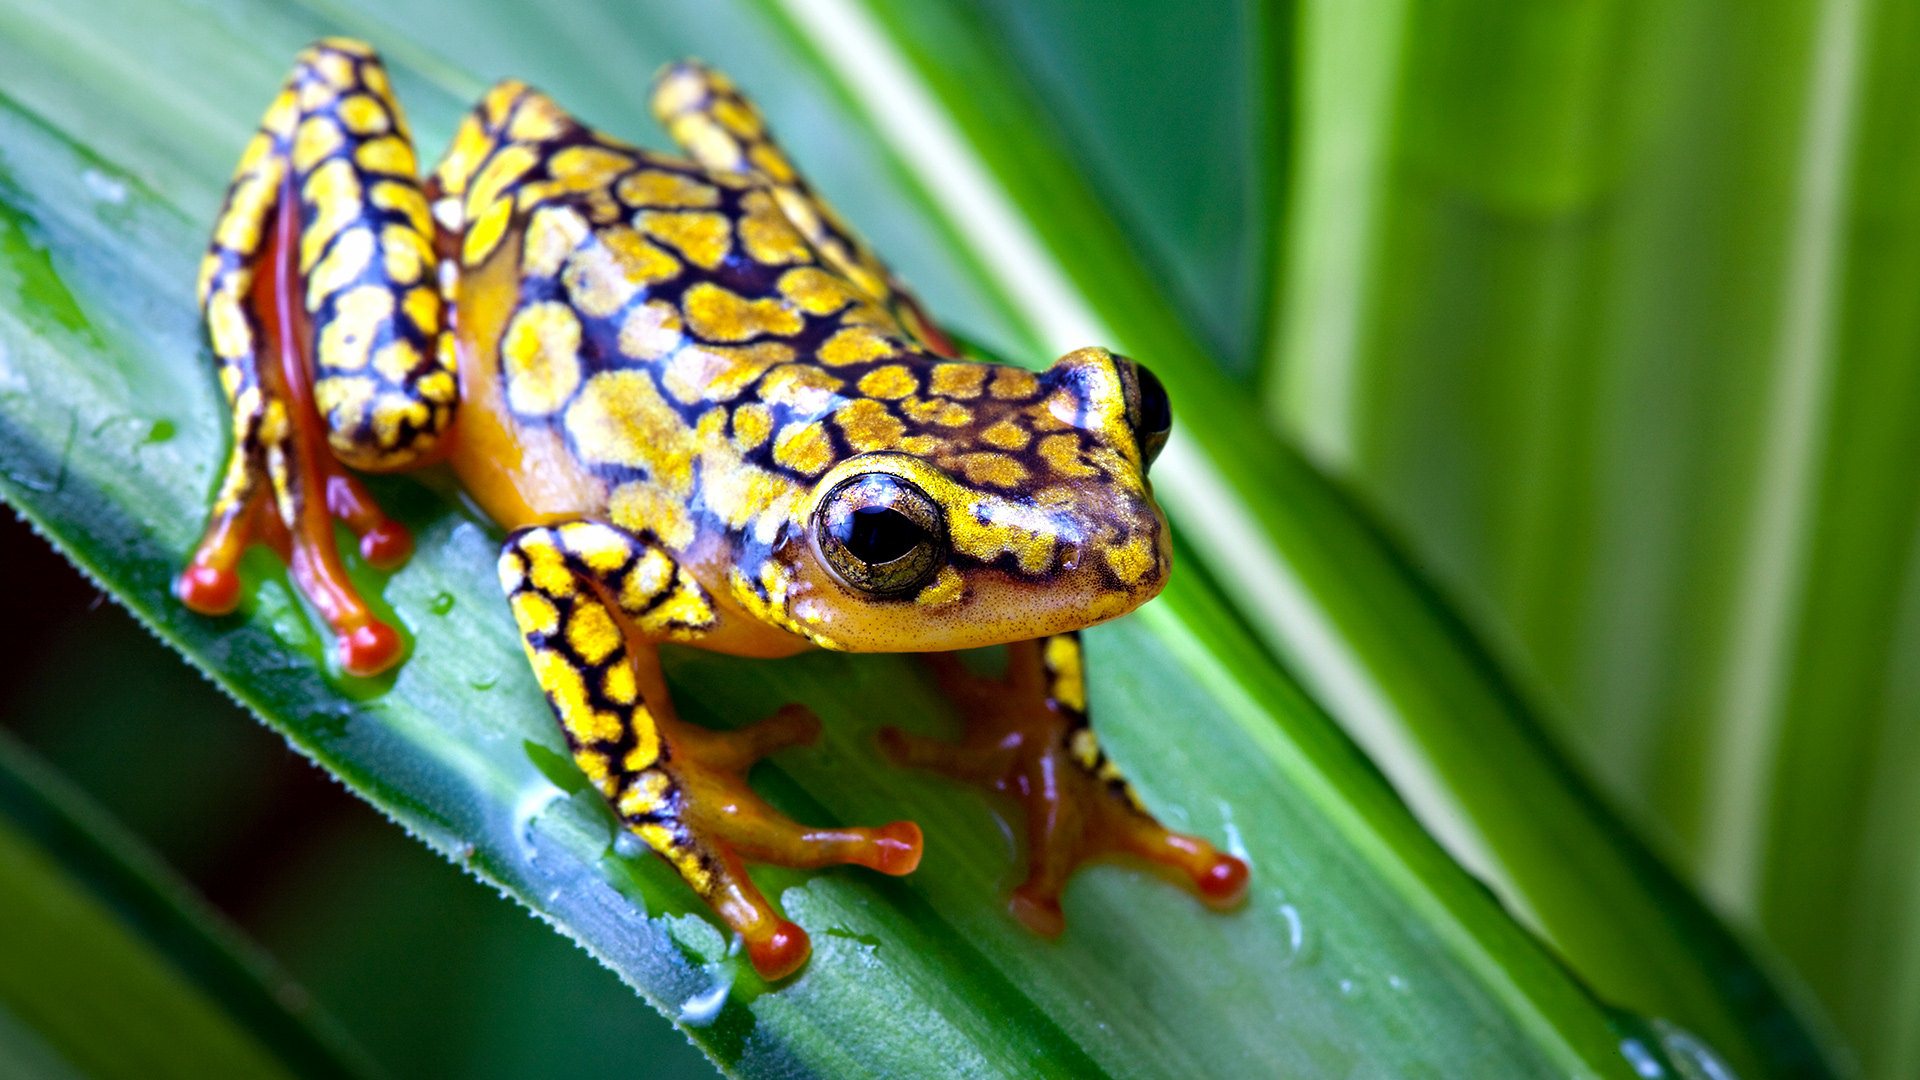 Frog on Leaf HD Wallpapers